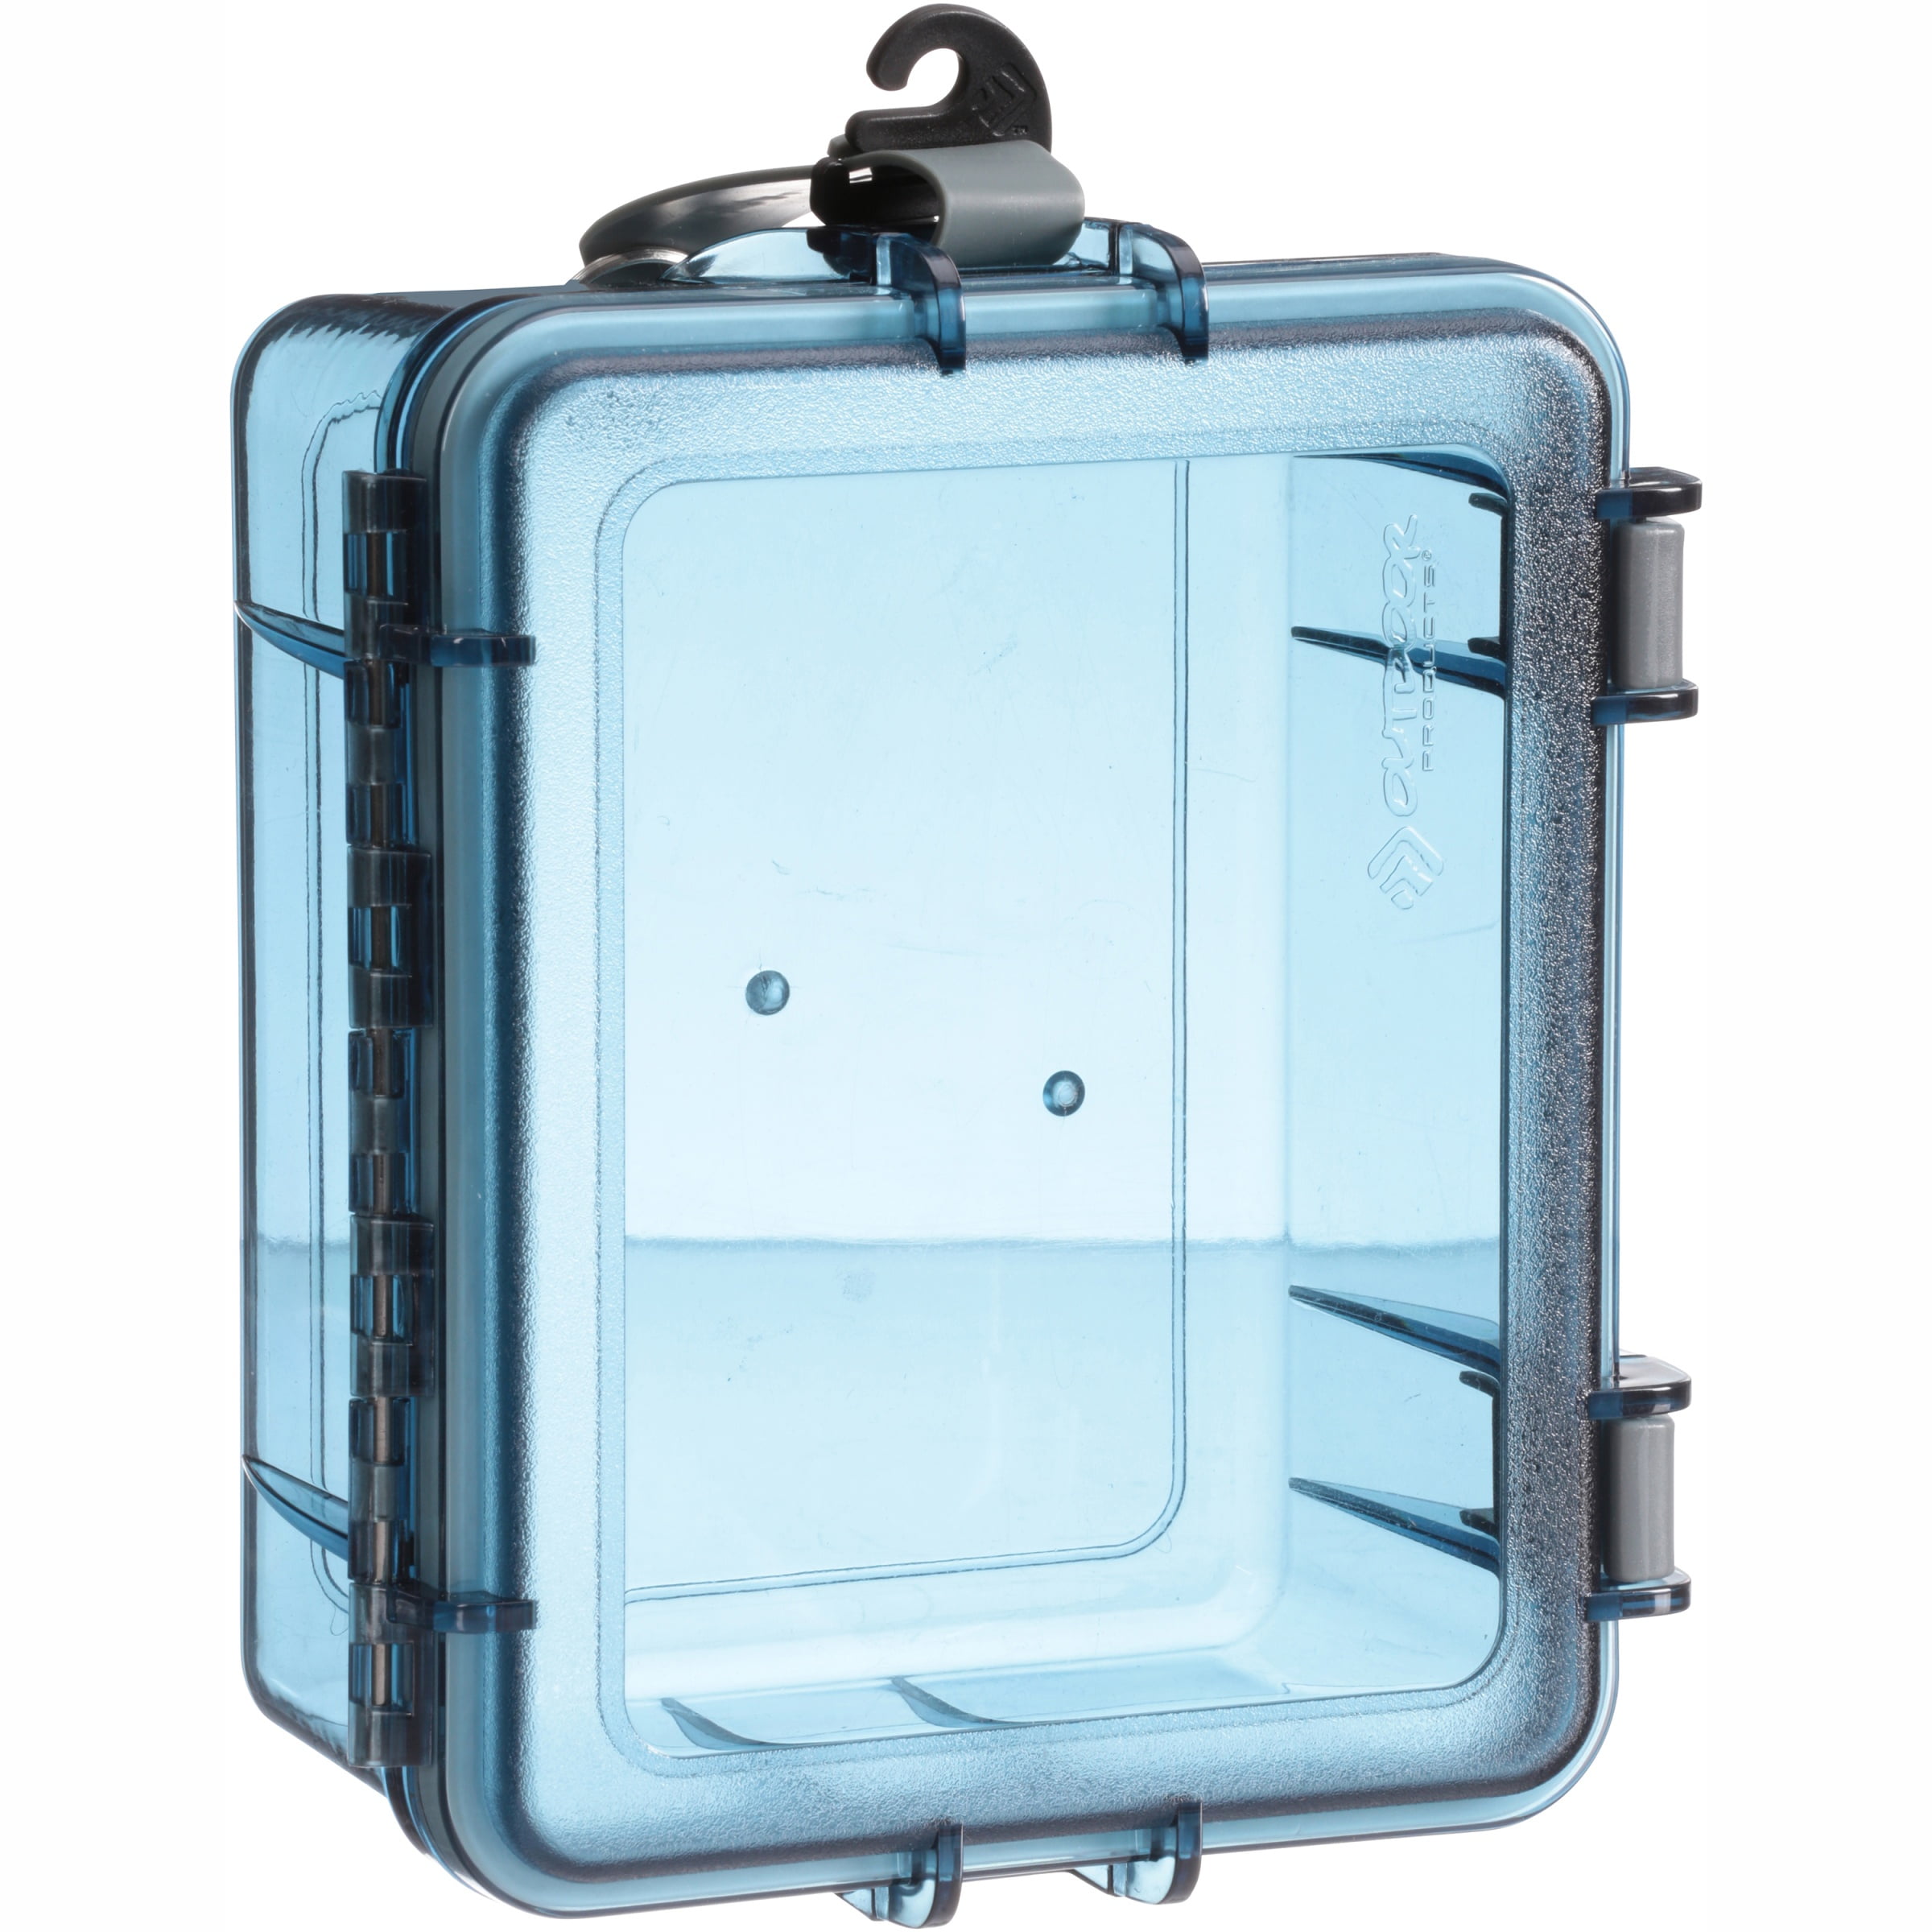 Outdoor Products Large Watertight Case Dry Box, Blue, 8 x 6.75 x 3.5,  Polycarbonate